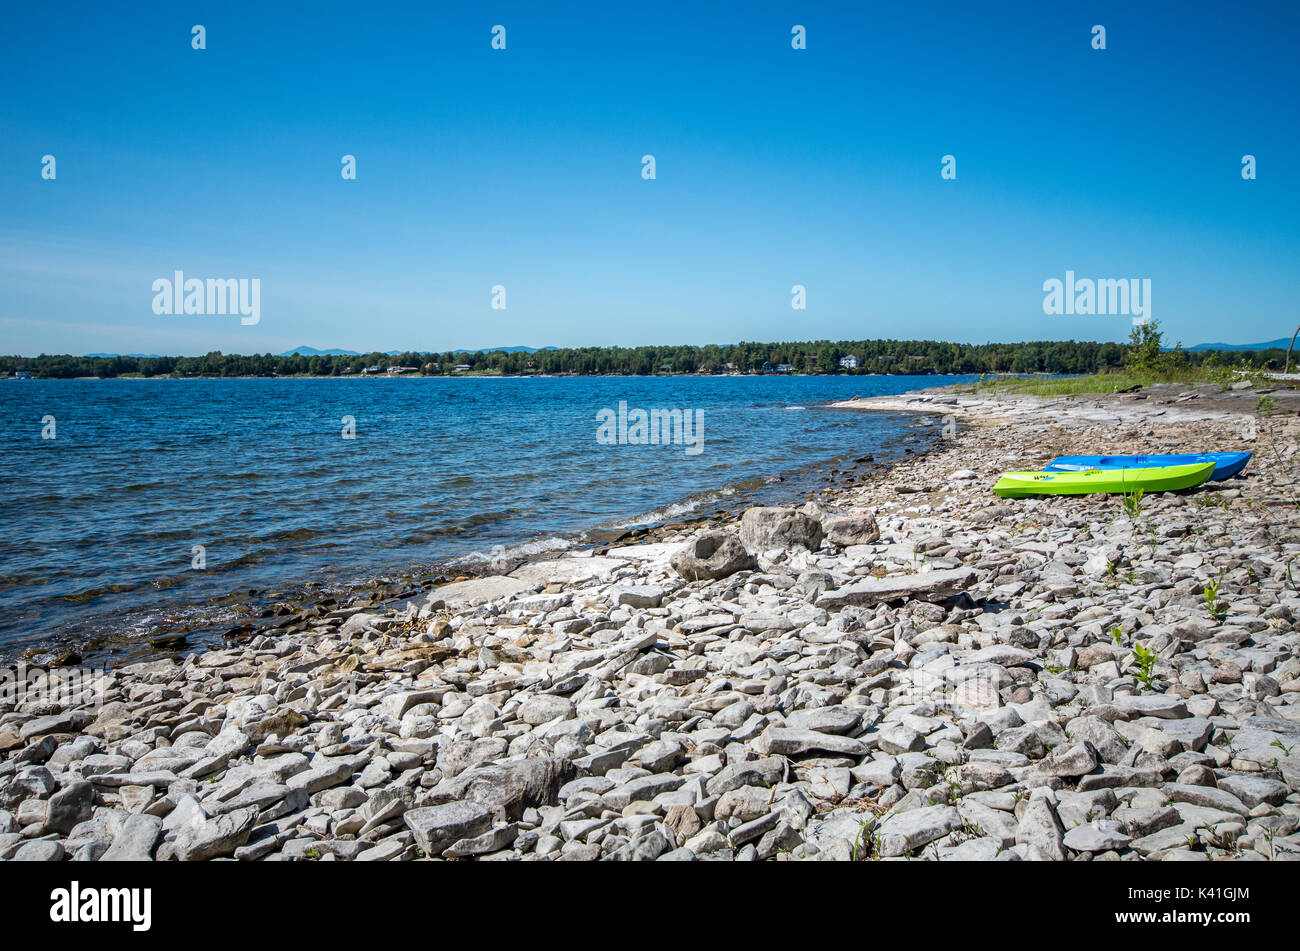 View of the rocky shoreline with kayaks on Valcour island, Peru New York Stock Photo